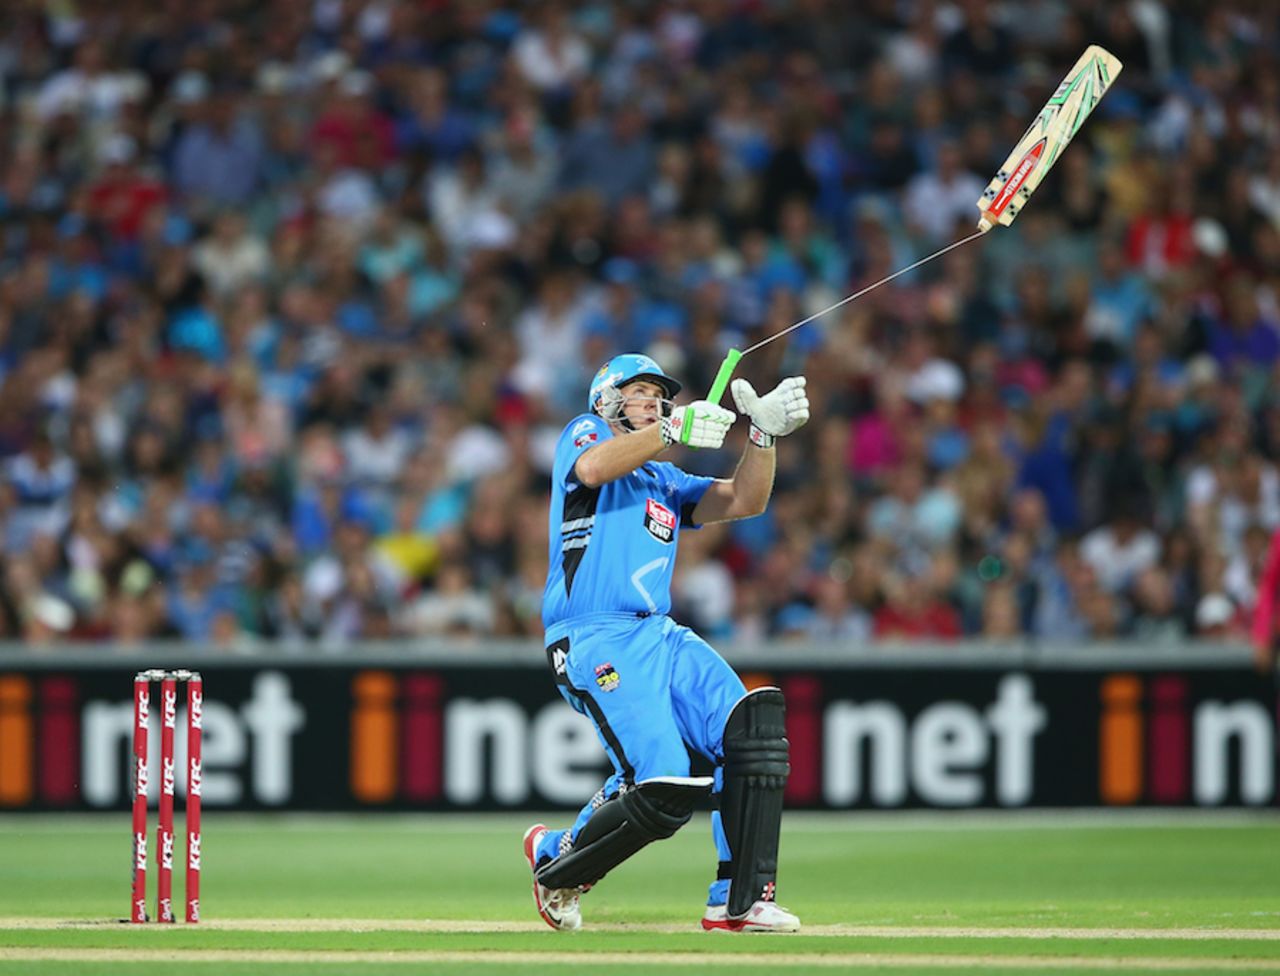 Breaking Bat: Craig Simmons gets an unusual sight of a broken bat, Adelaide Strikers v Sydney Sixers, BBL 2014-15, semi-final, Adelaide, January 24, 2015